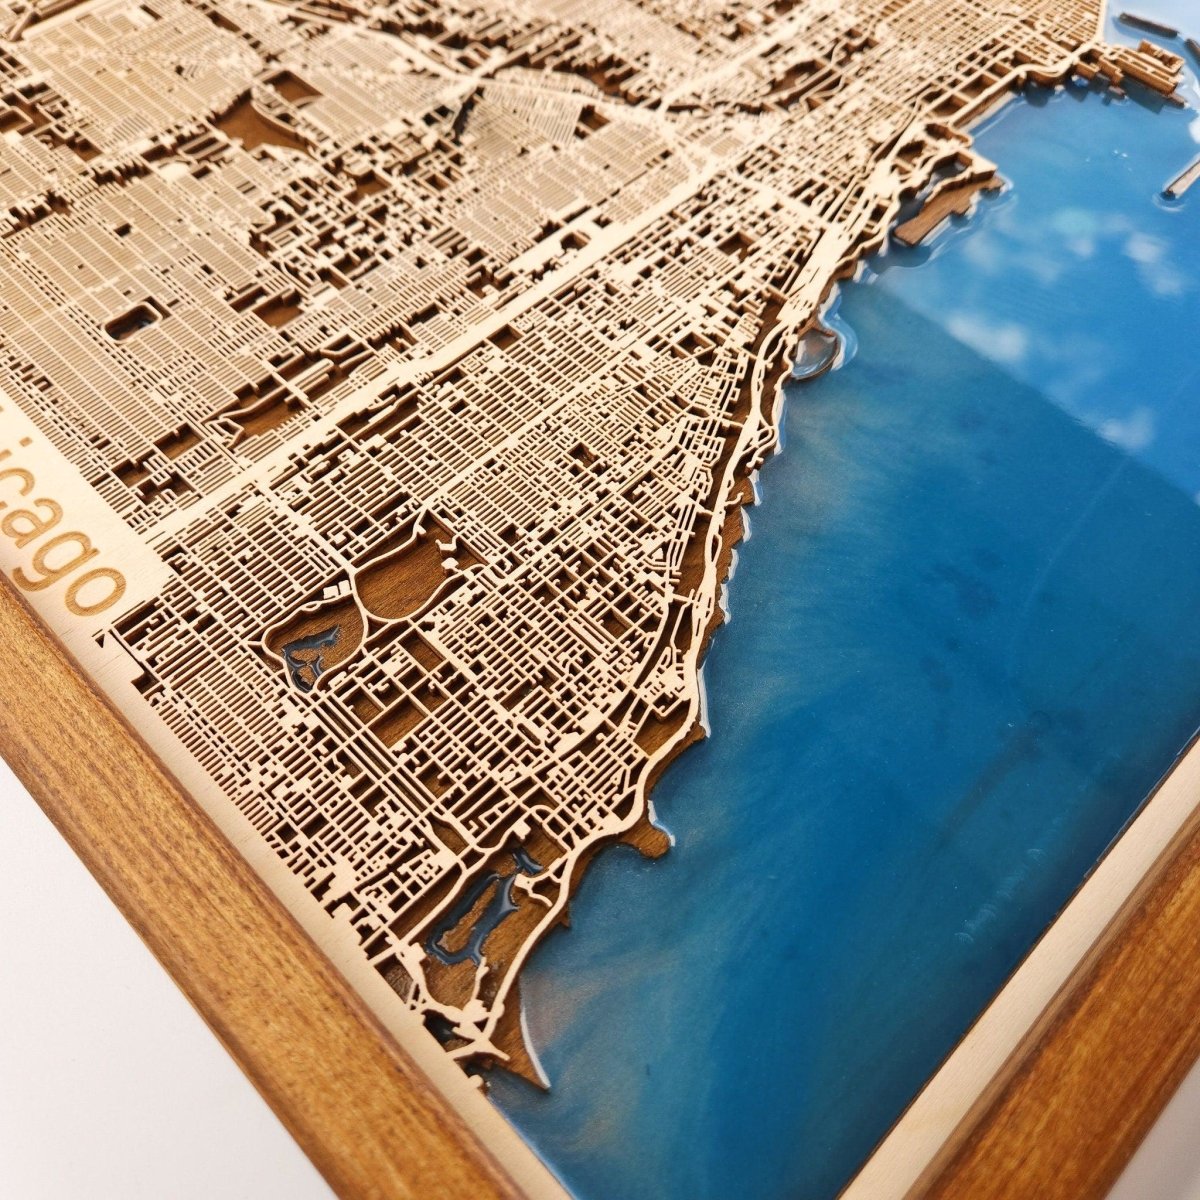 Wooden Map of Any City